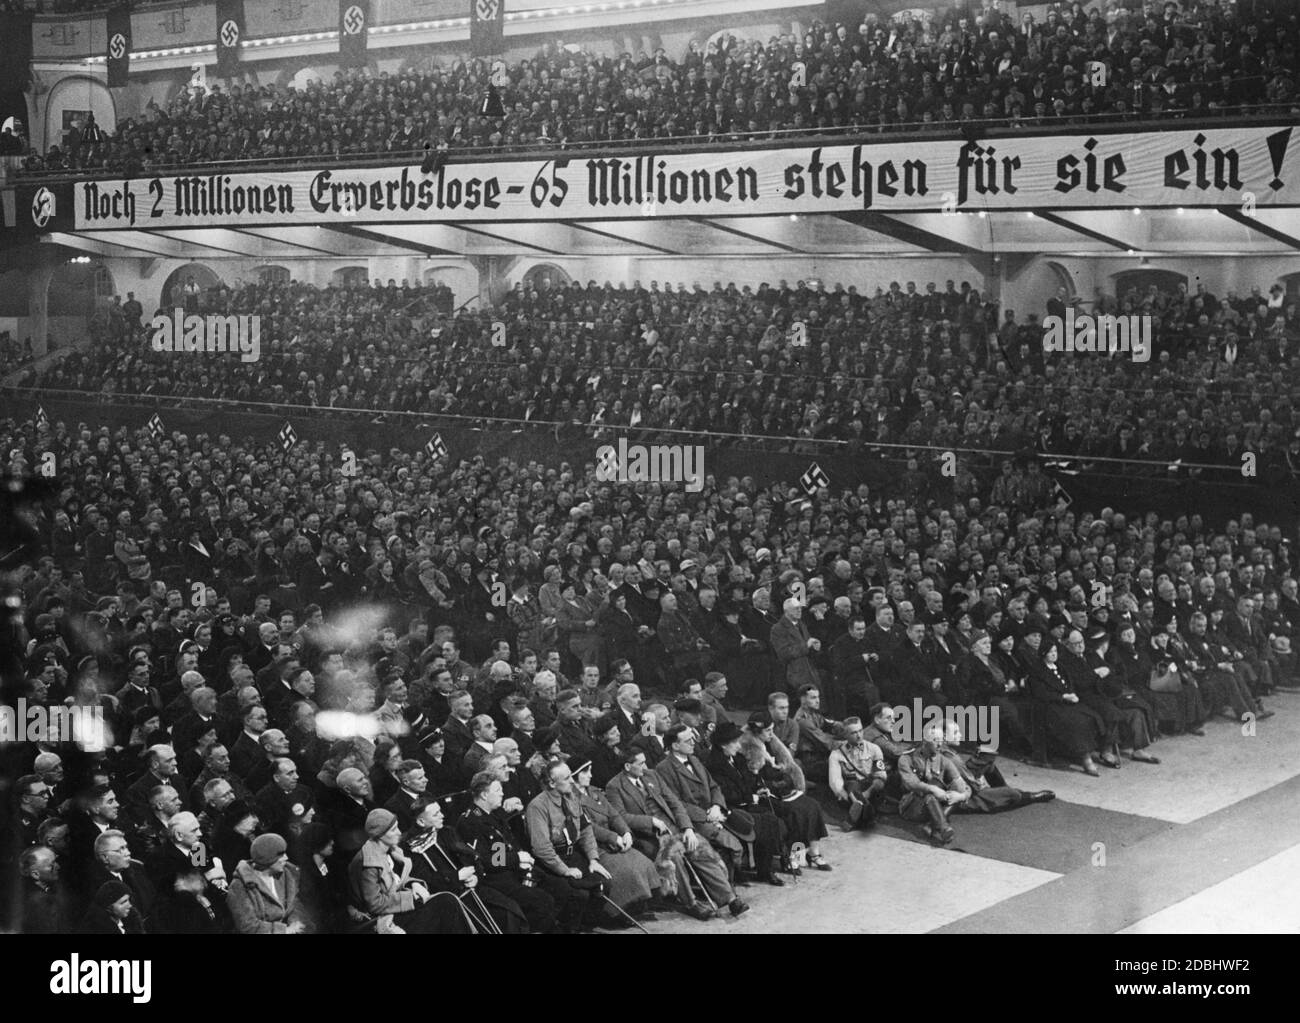 'View of the audience during a speech by Joseph Goebbels at the Berlin Sportpalast. Some SA members are sitting on the floor. A banner reads ''2 million unemployed - 65 million still stand up for them!''' Stock Photo